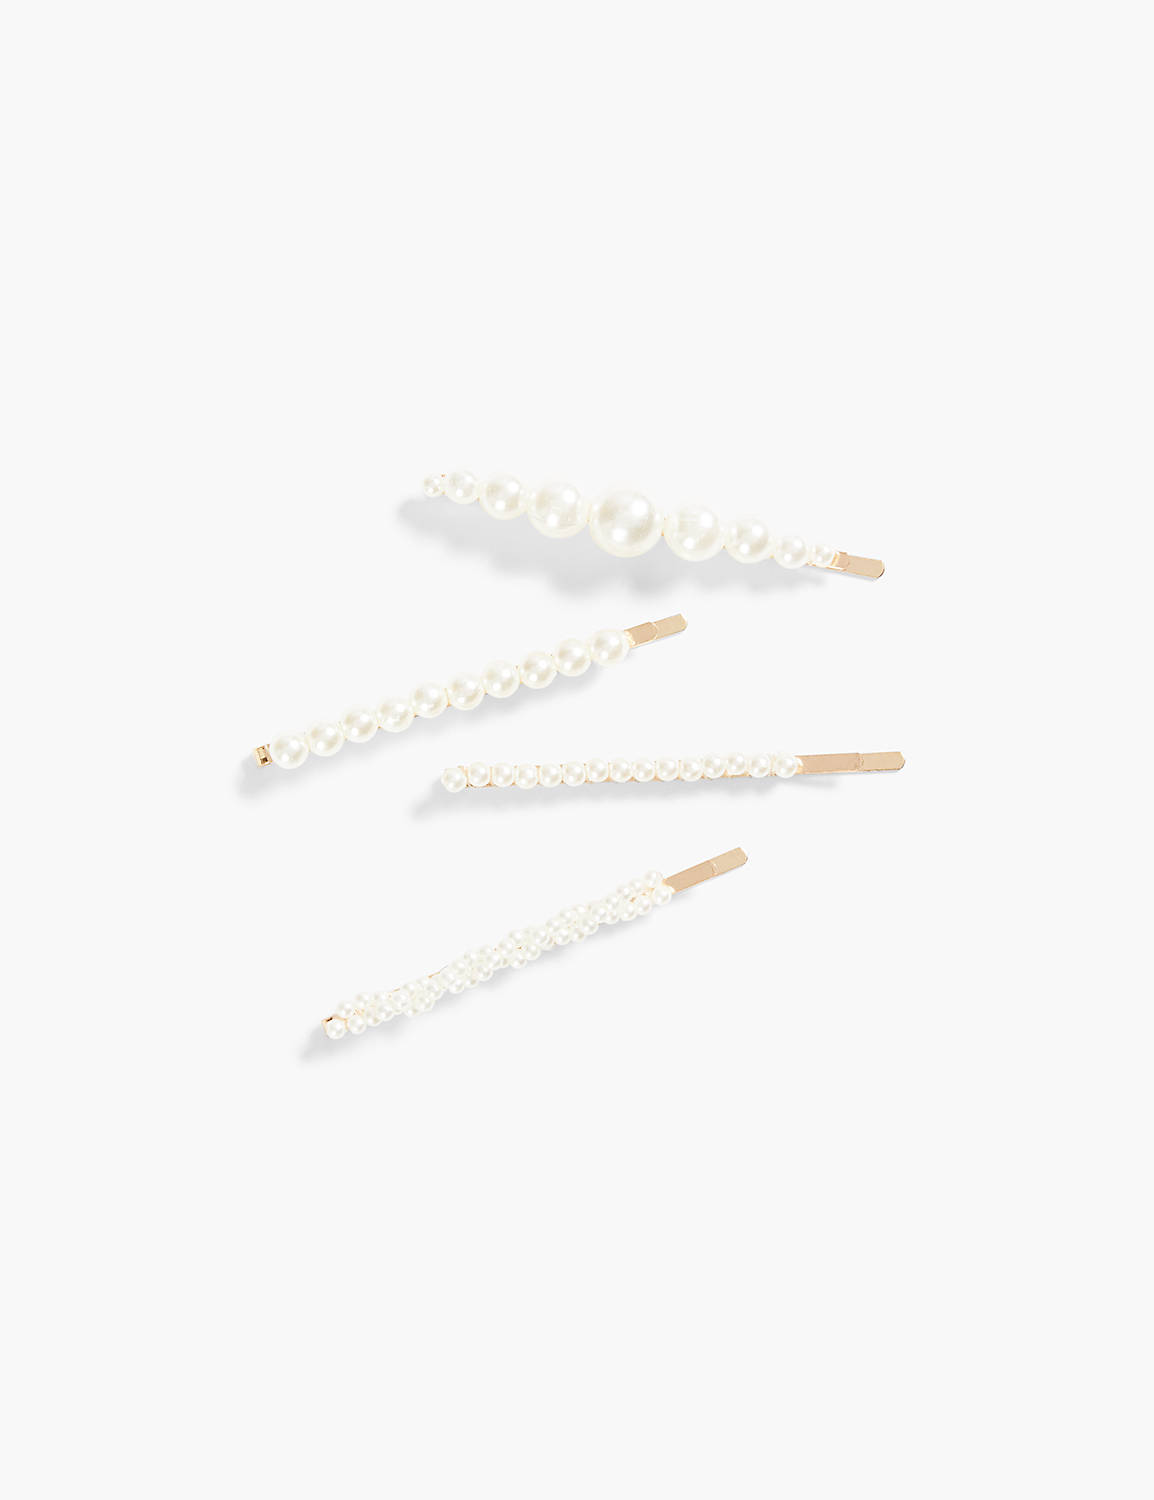 PEARL BOBBY PIN SET:Gold Tone:ONESZ Product Image 1